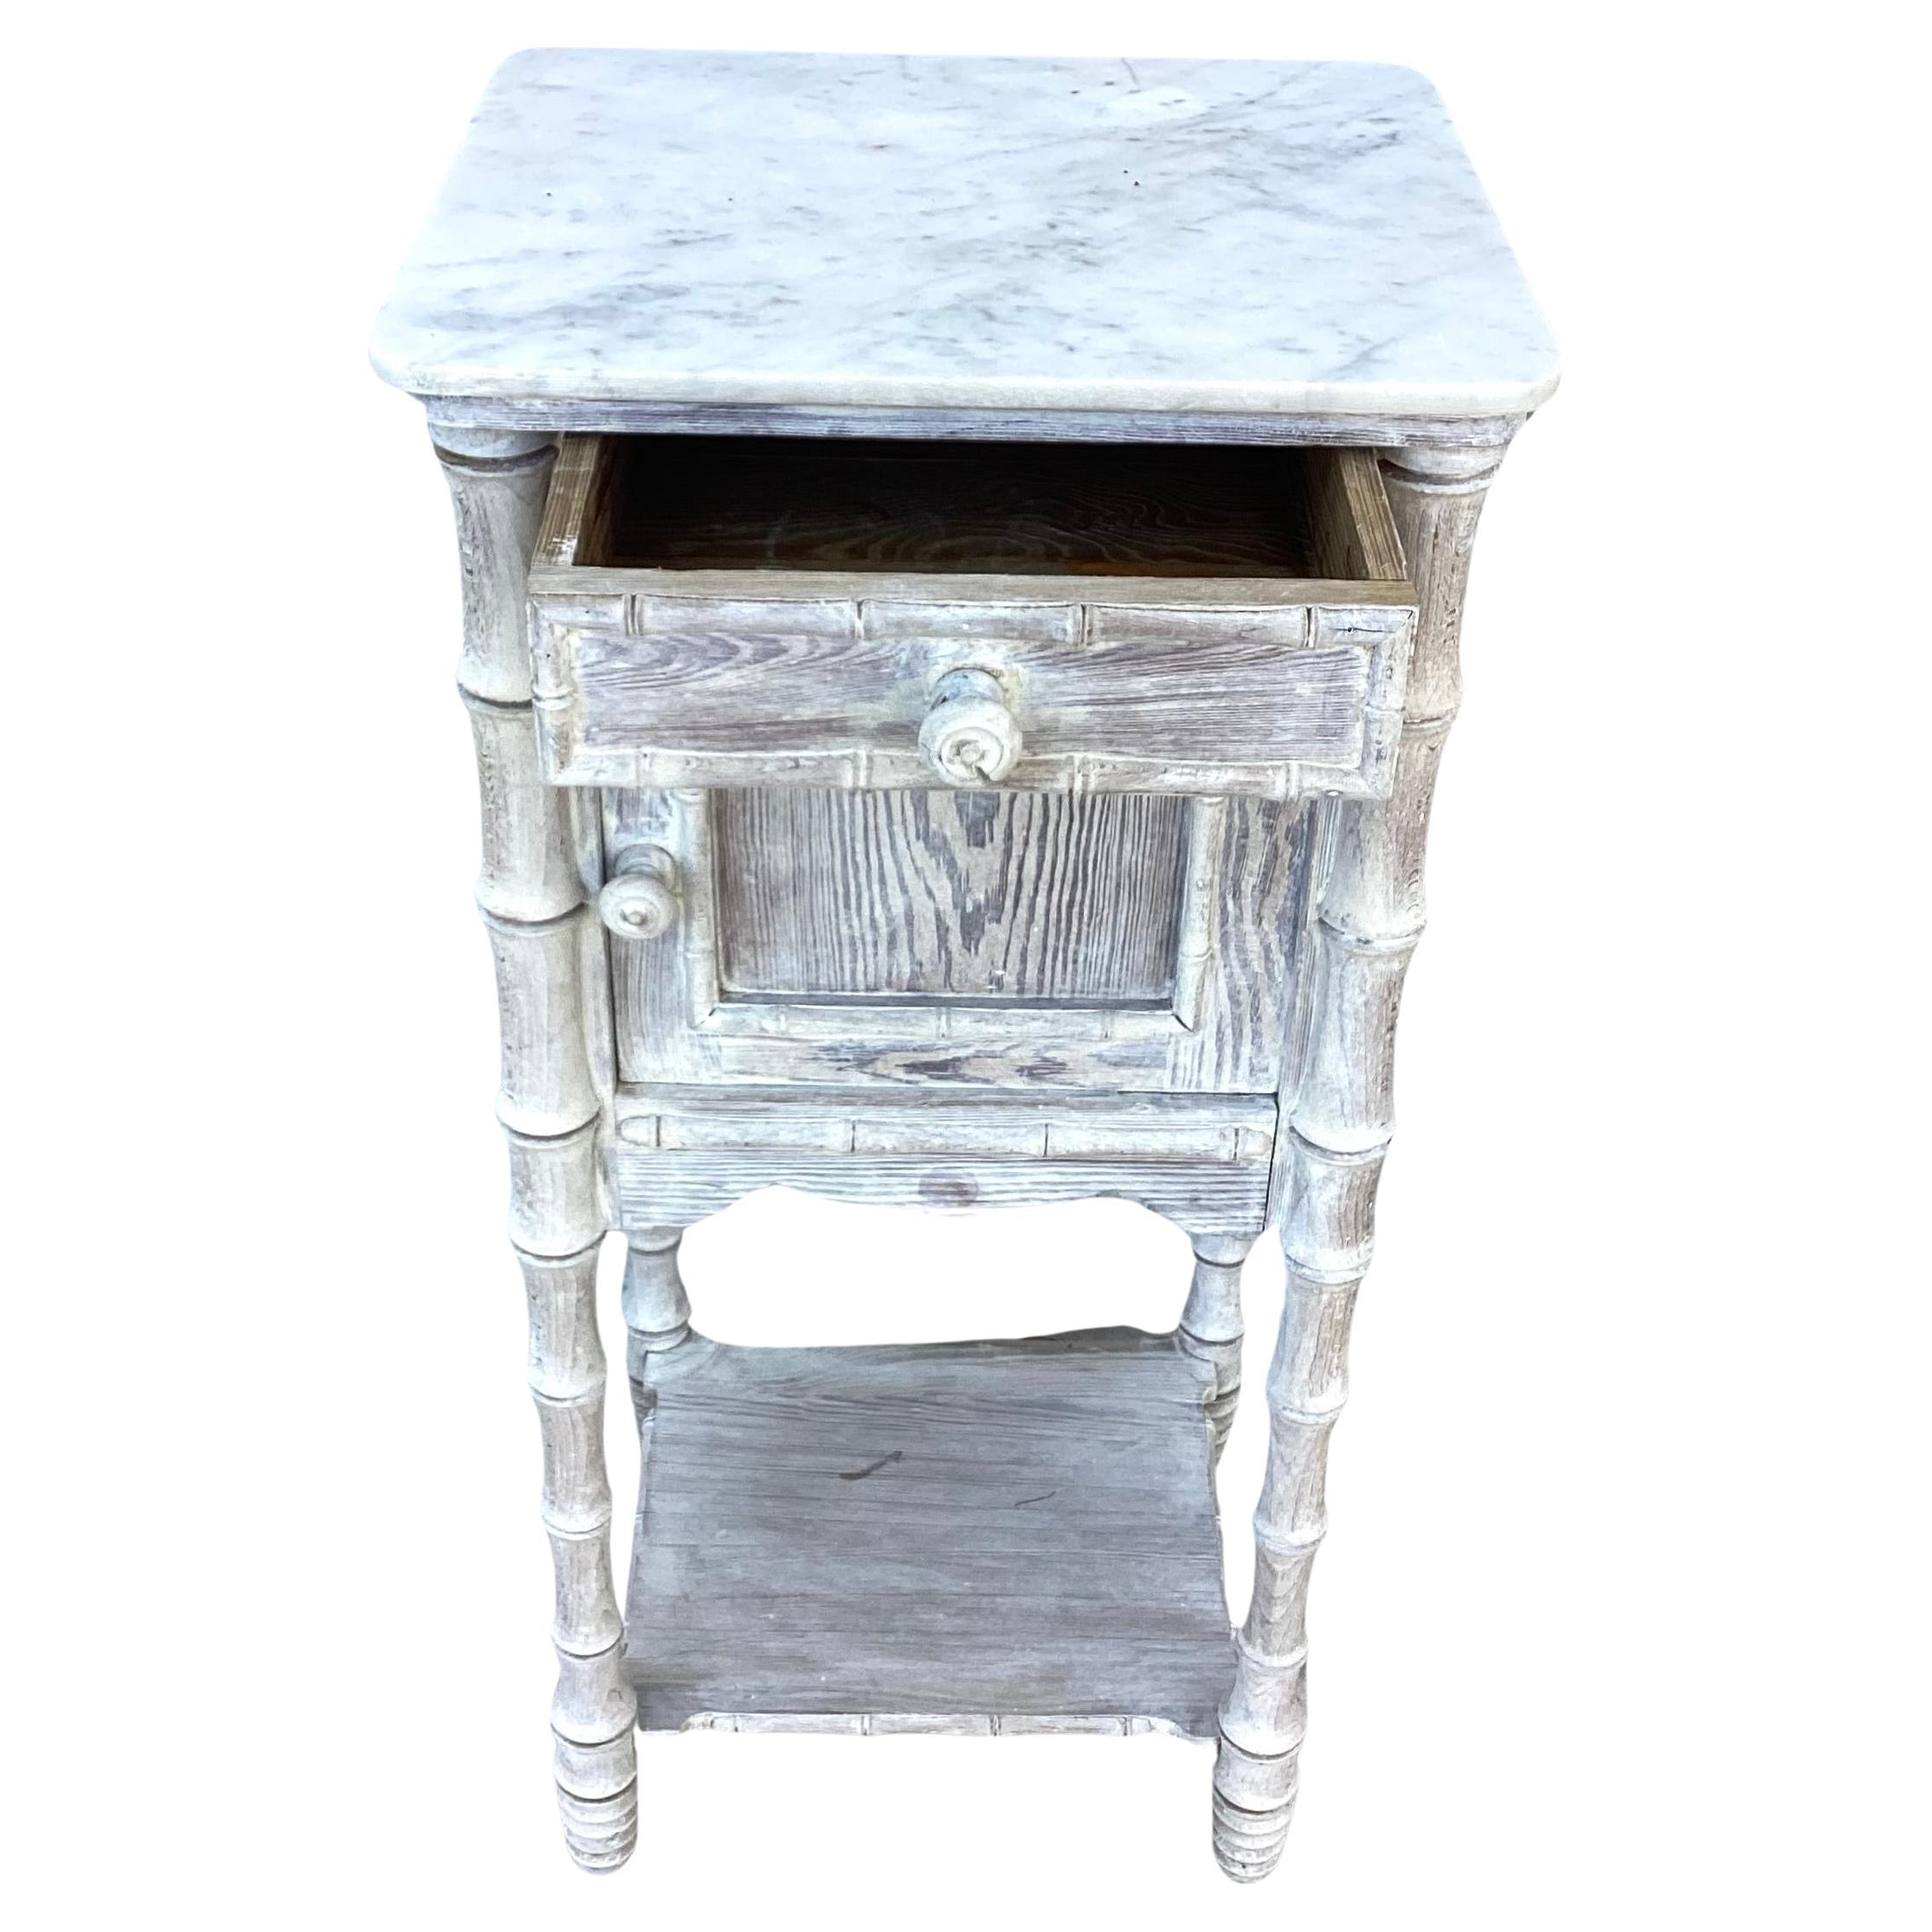 20th Century Vintage Faux Bamboo Nightstand or Side Table With White Marble Top      #2 For Sale